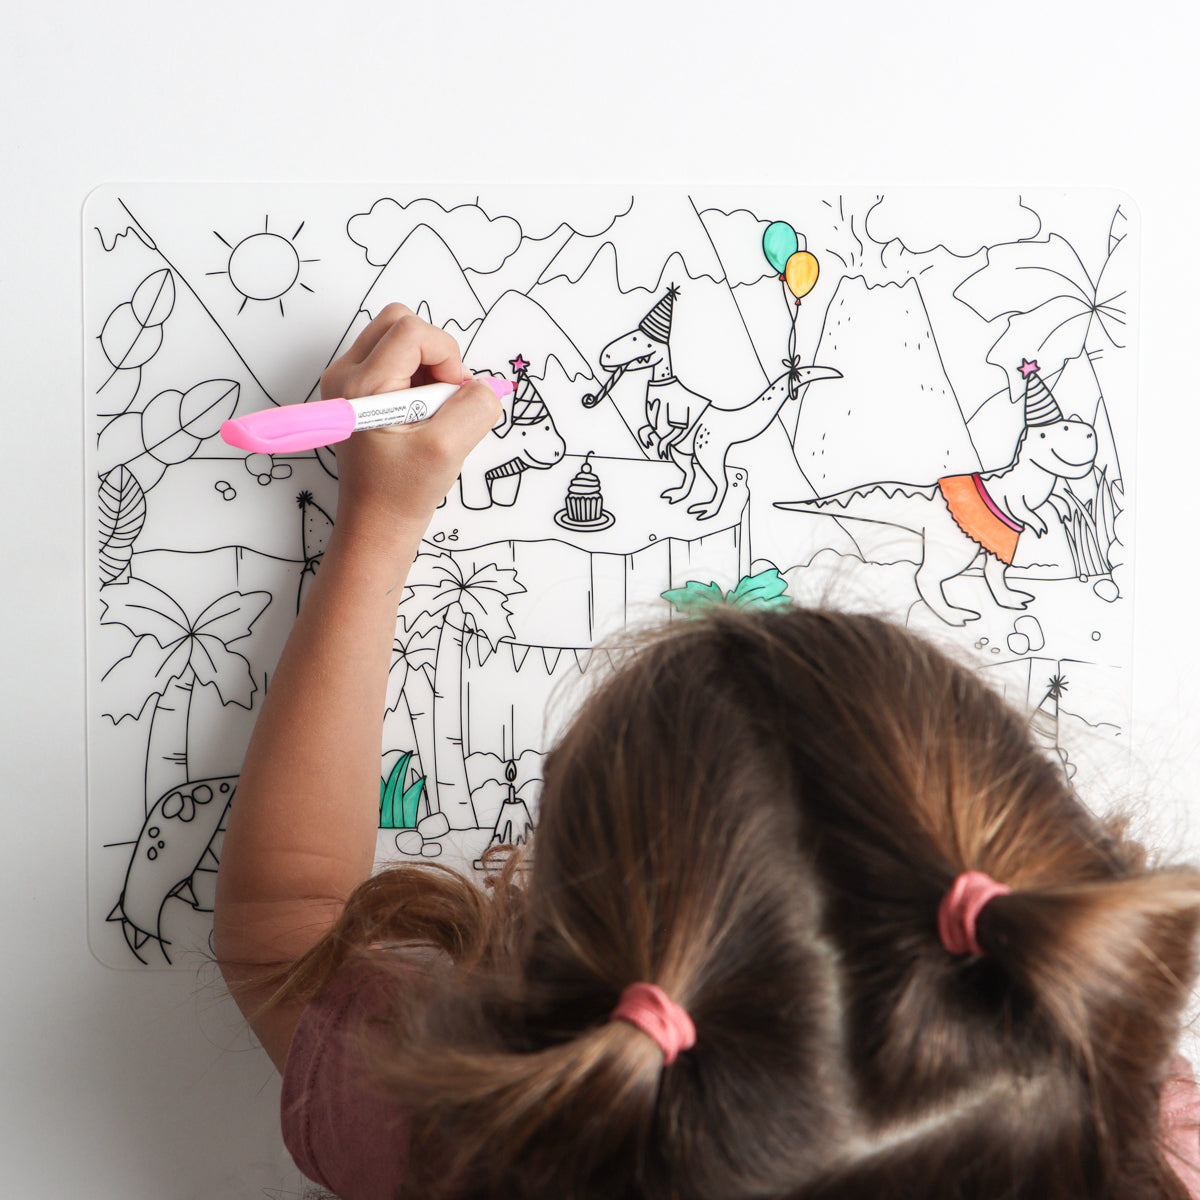 Silicone erasable and reusable coloring tablemat exclusive design Dinosaurs Dinos Party map for kids with set of dry-erase markers for kids by Mks miminoo gilbert arizona montessori homeschooling traveling activities